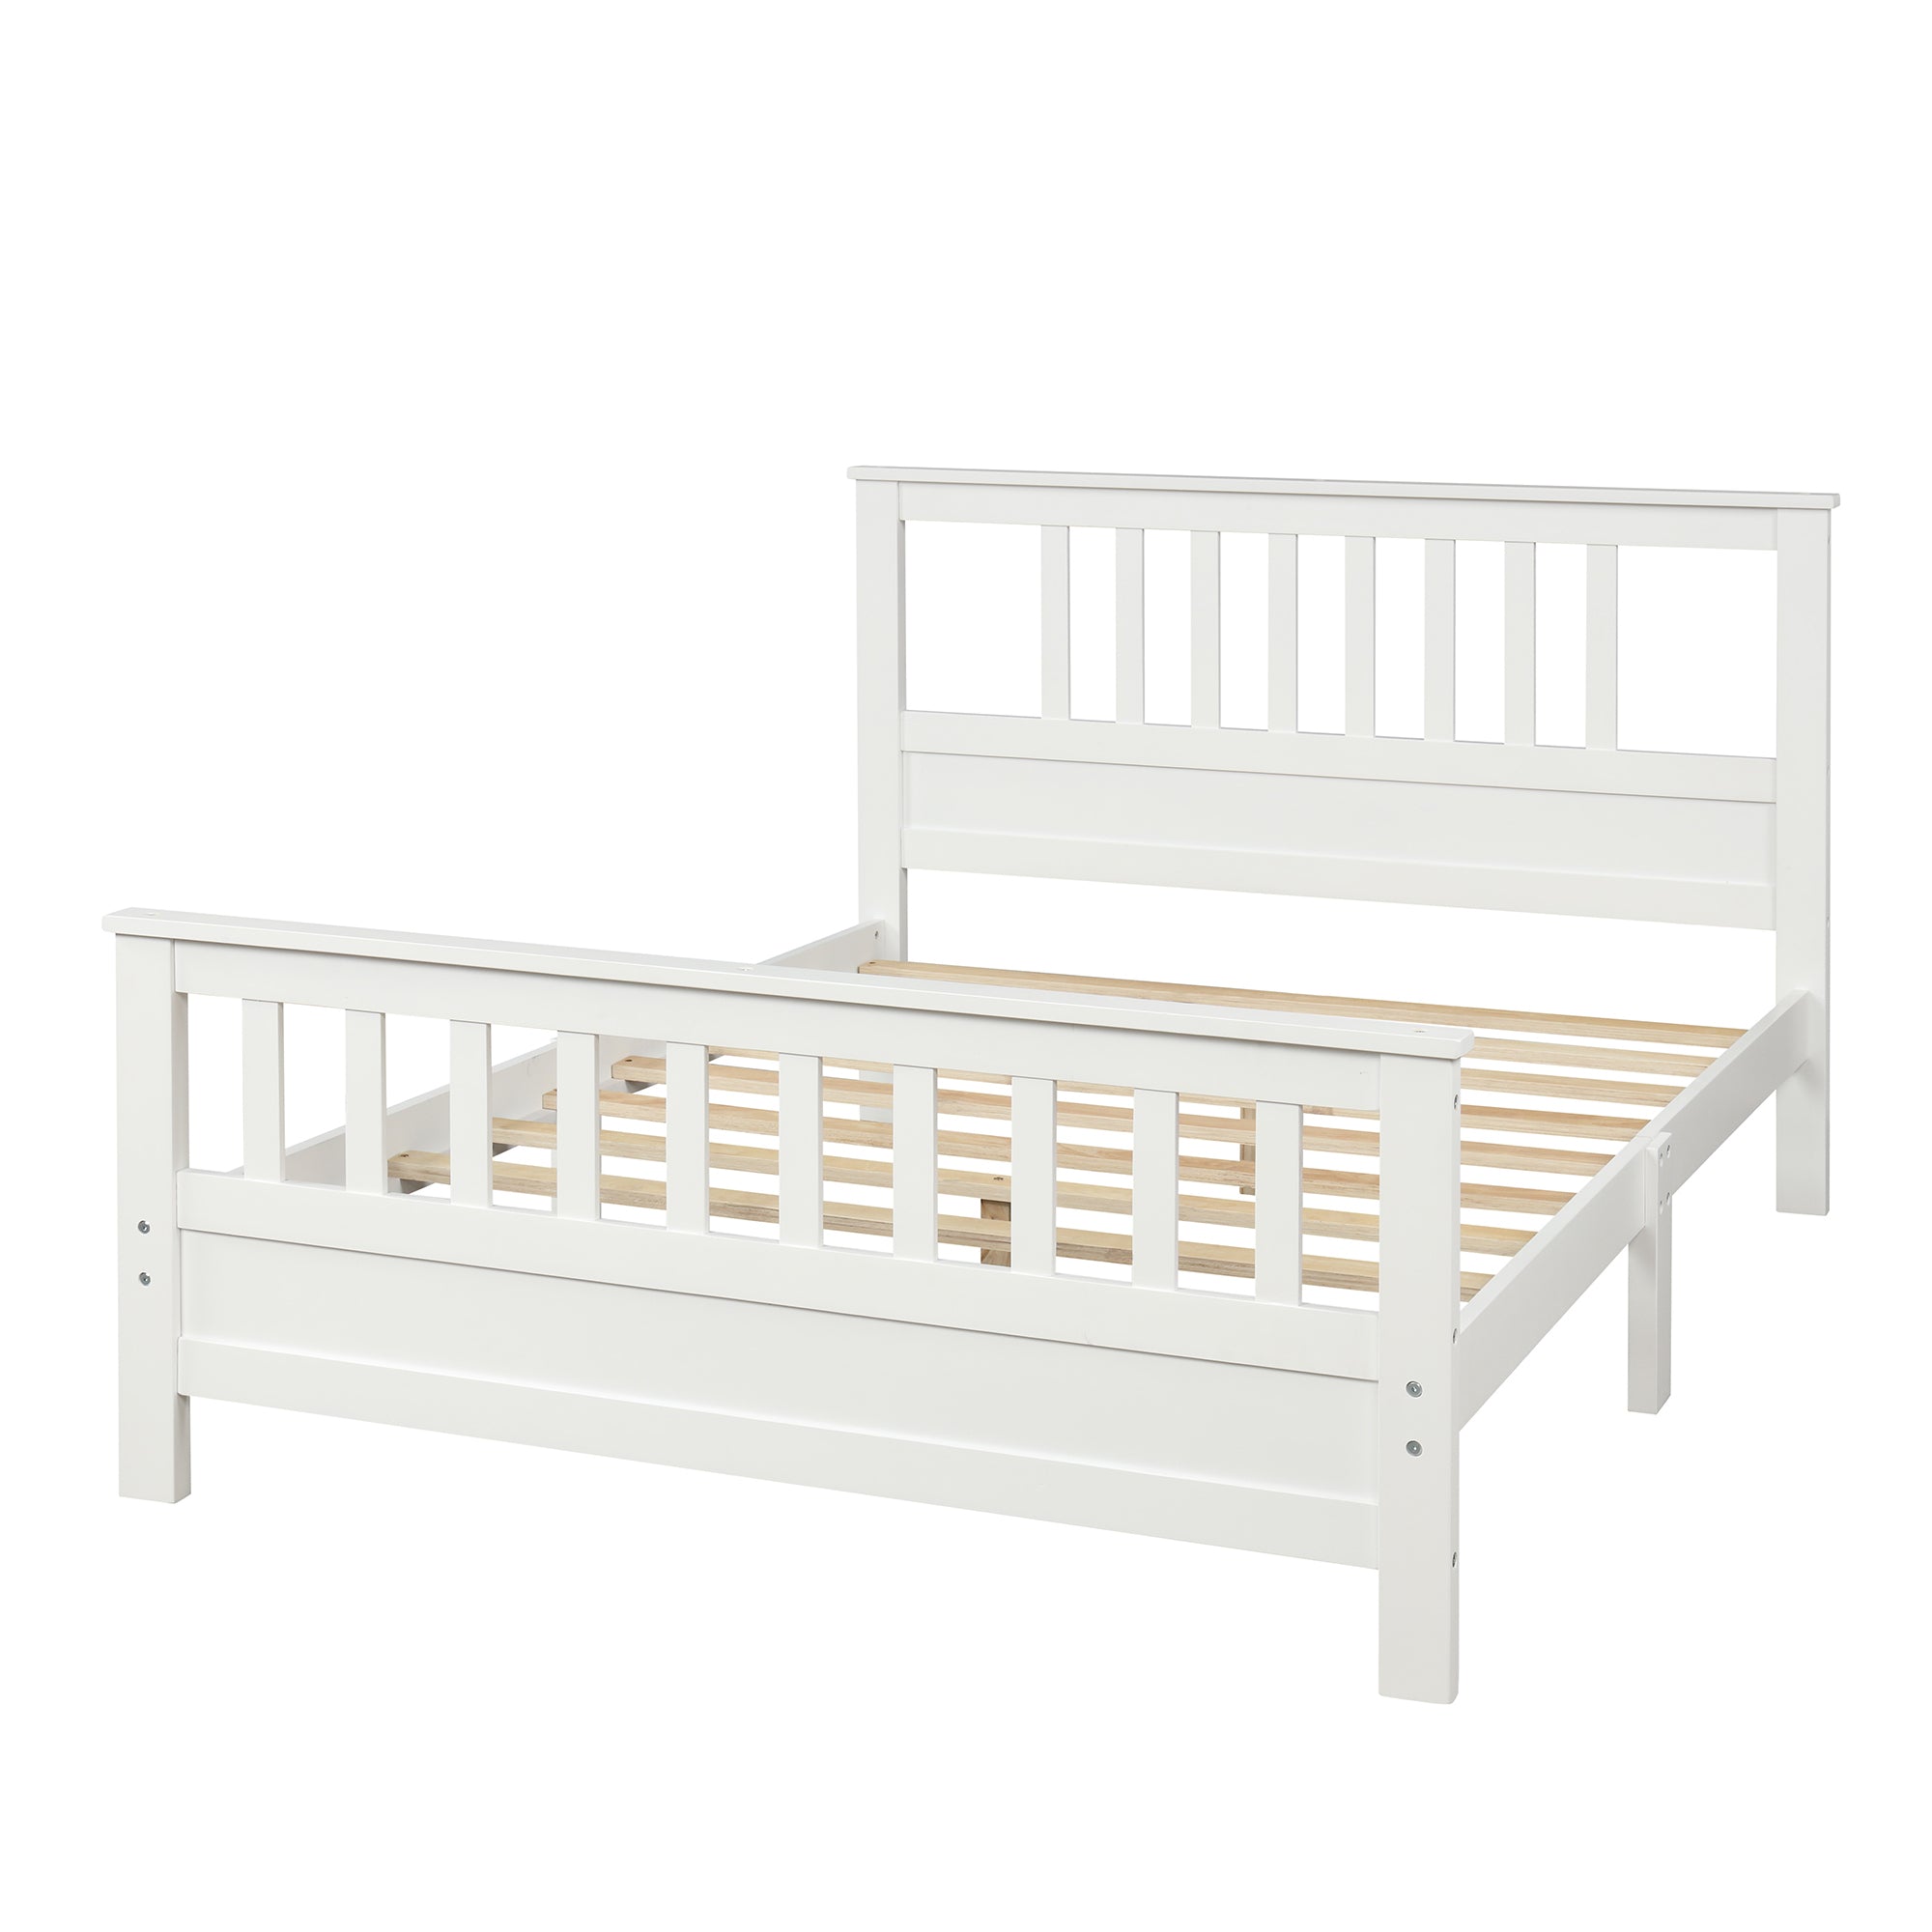 White Wooden Platform Bed Frame with Headboard and Footboard by: Alabama Beds